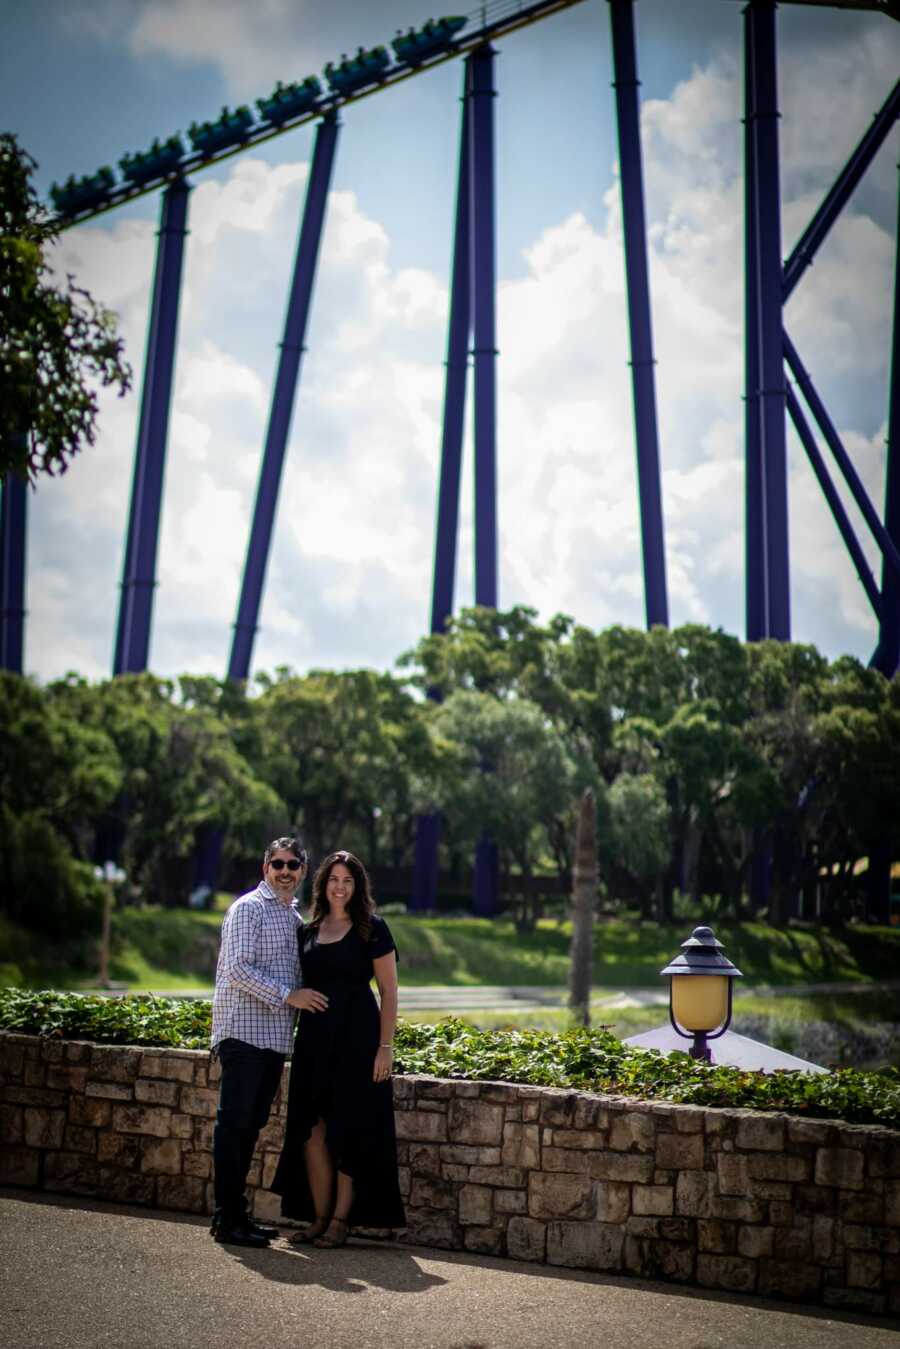 Woman takes an engagement photo with her new fiancé at Seaworld 